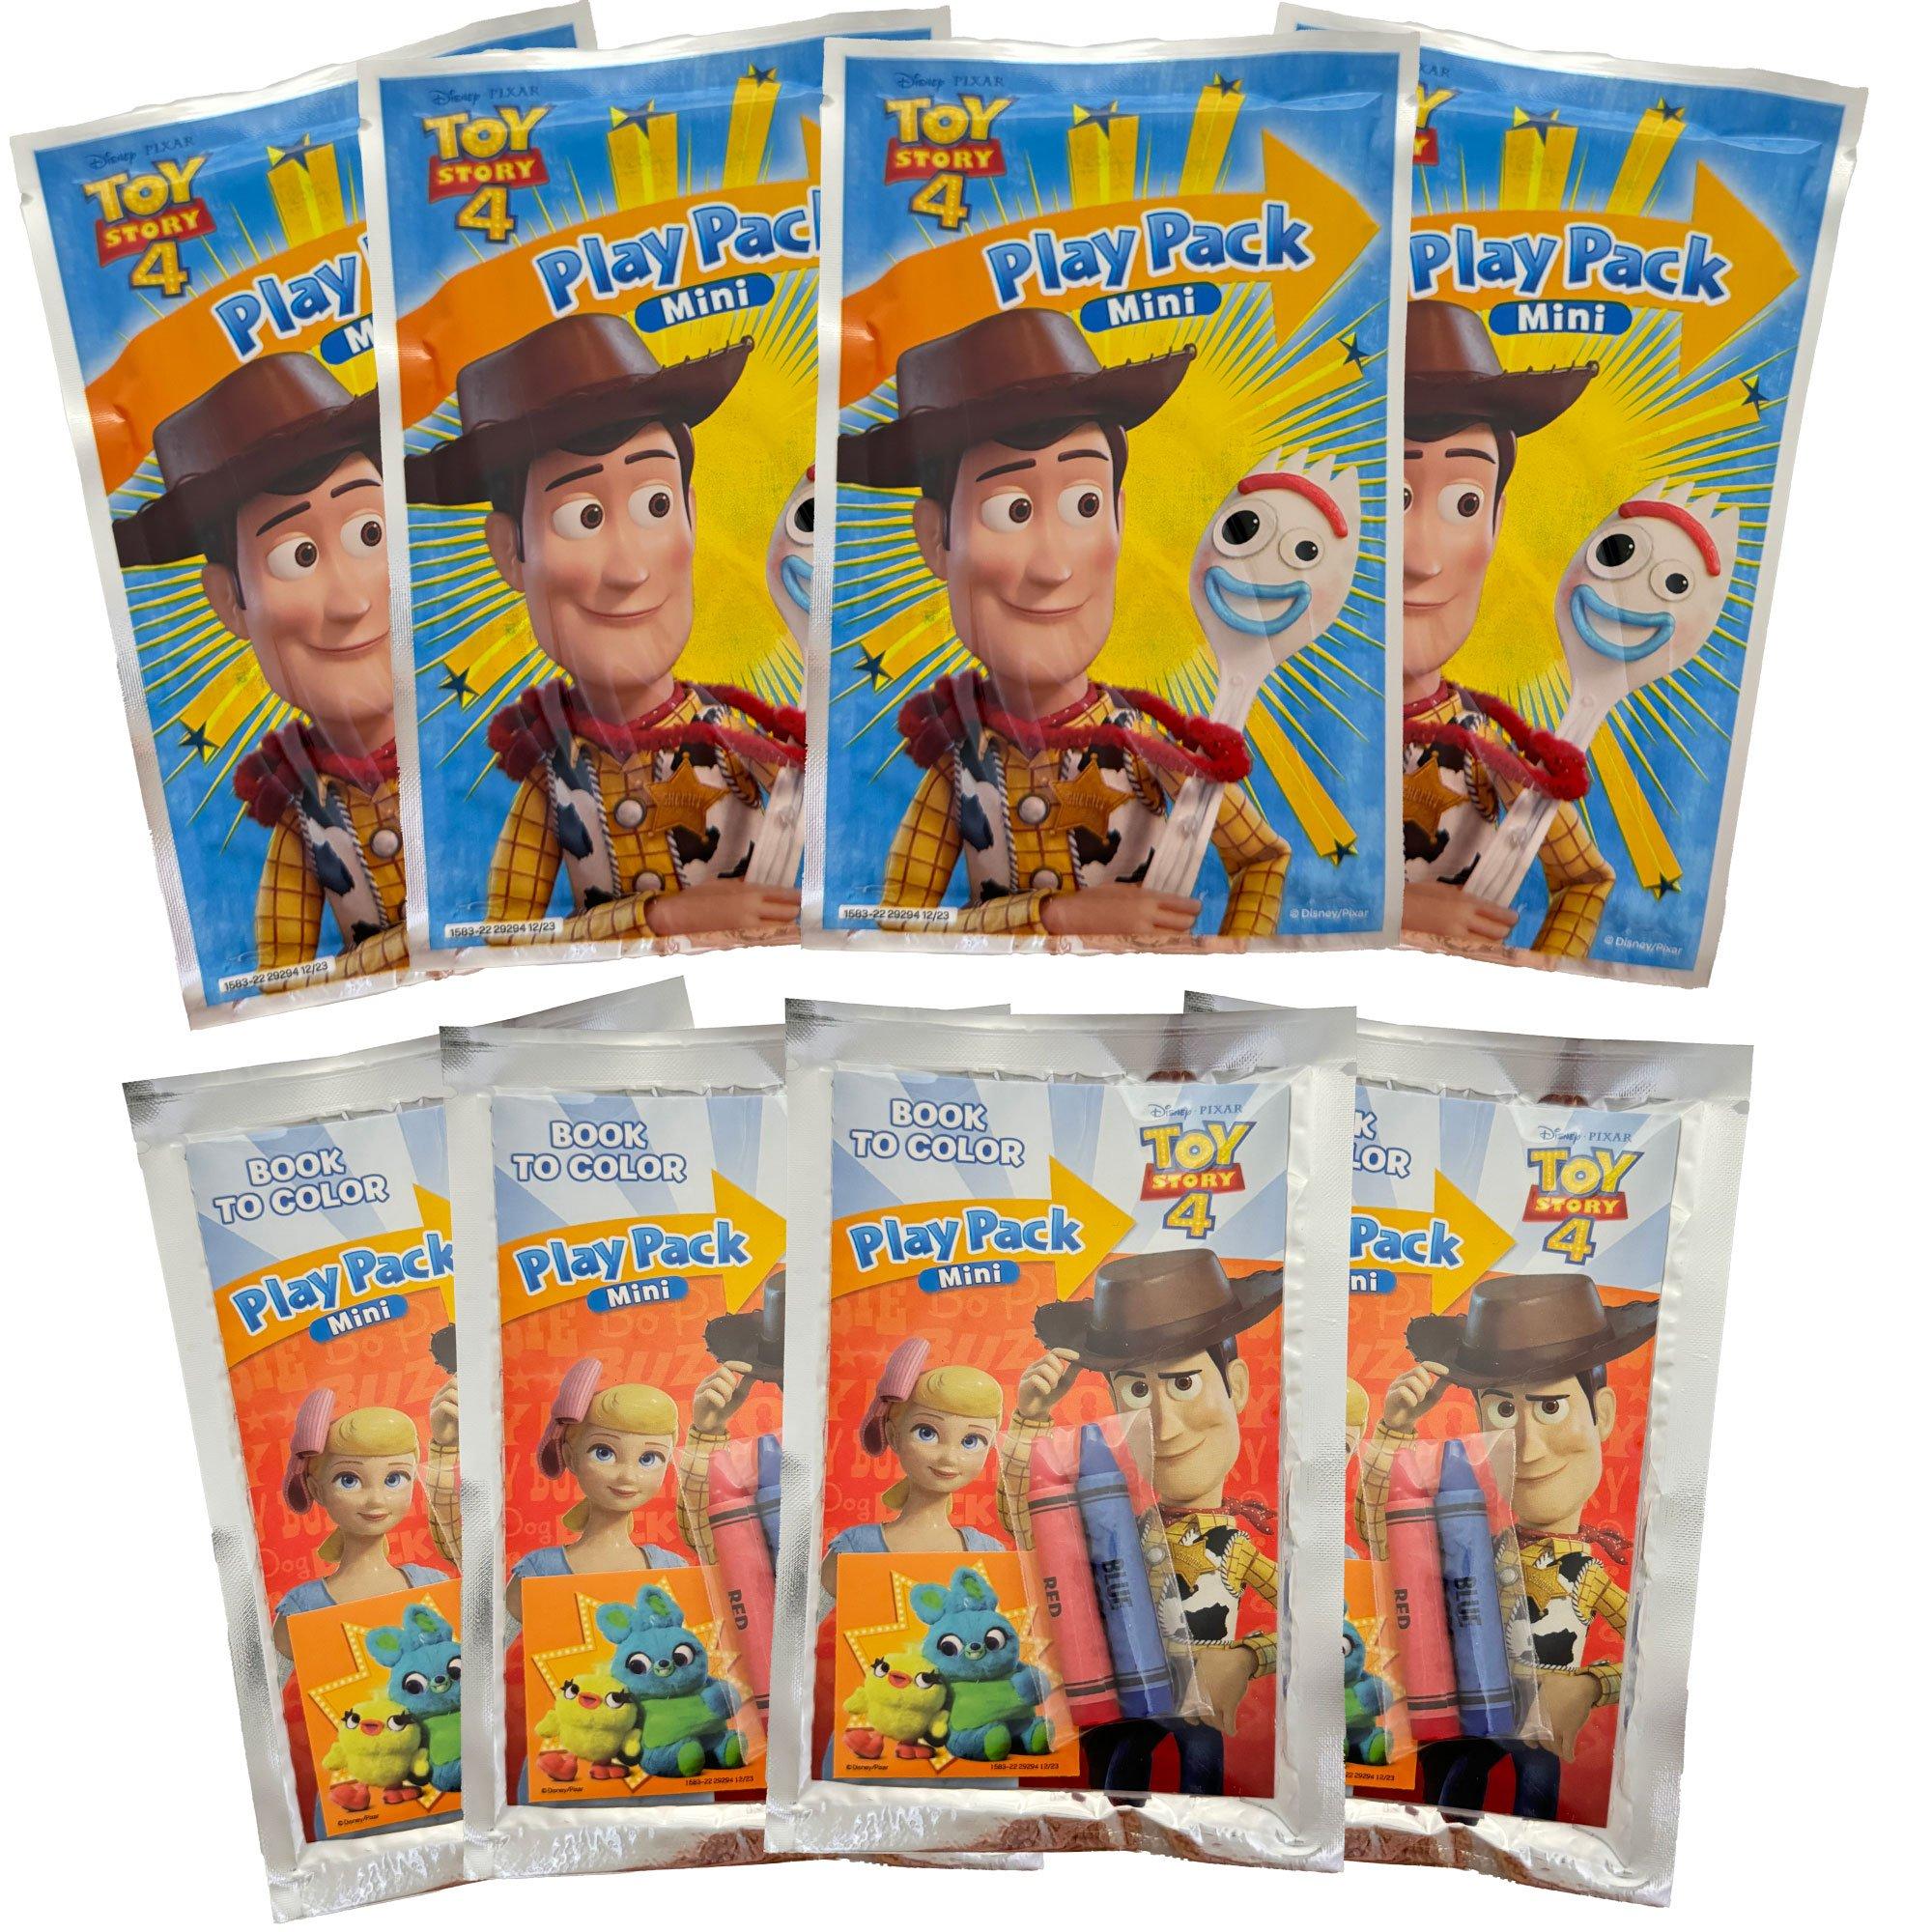 Toy Story 4 Mini Play Packs, 10ct